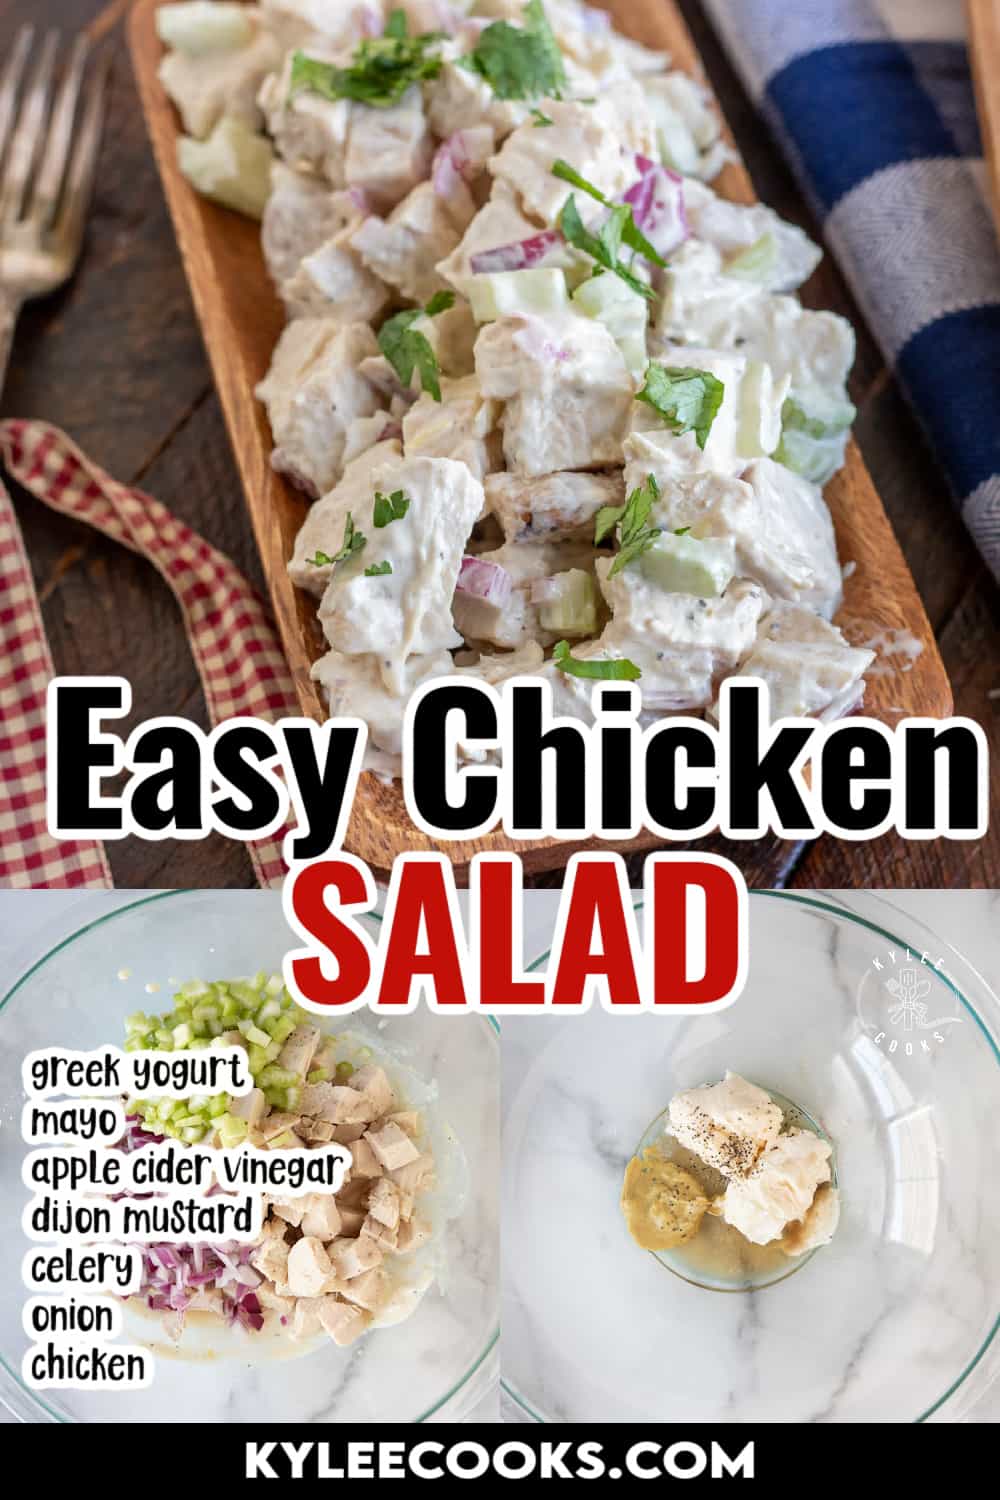 collage of chicken salad and bowls with recipe name and ingredients overlaid in text.